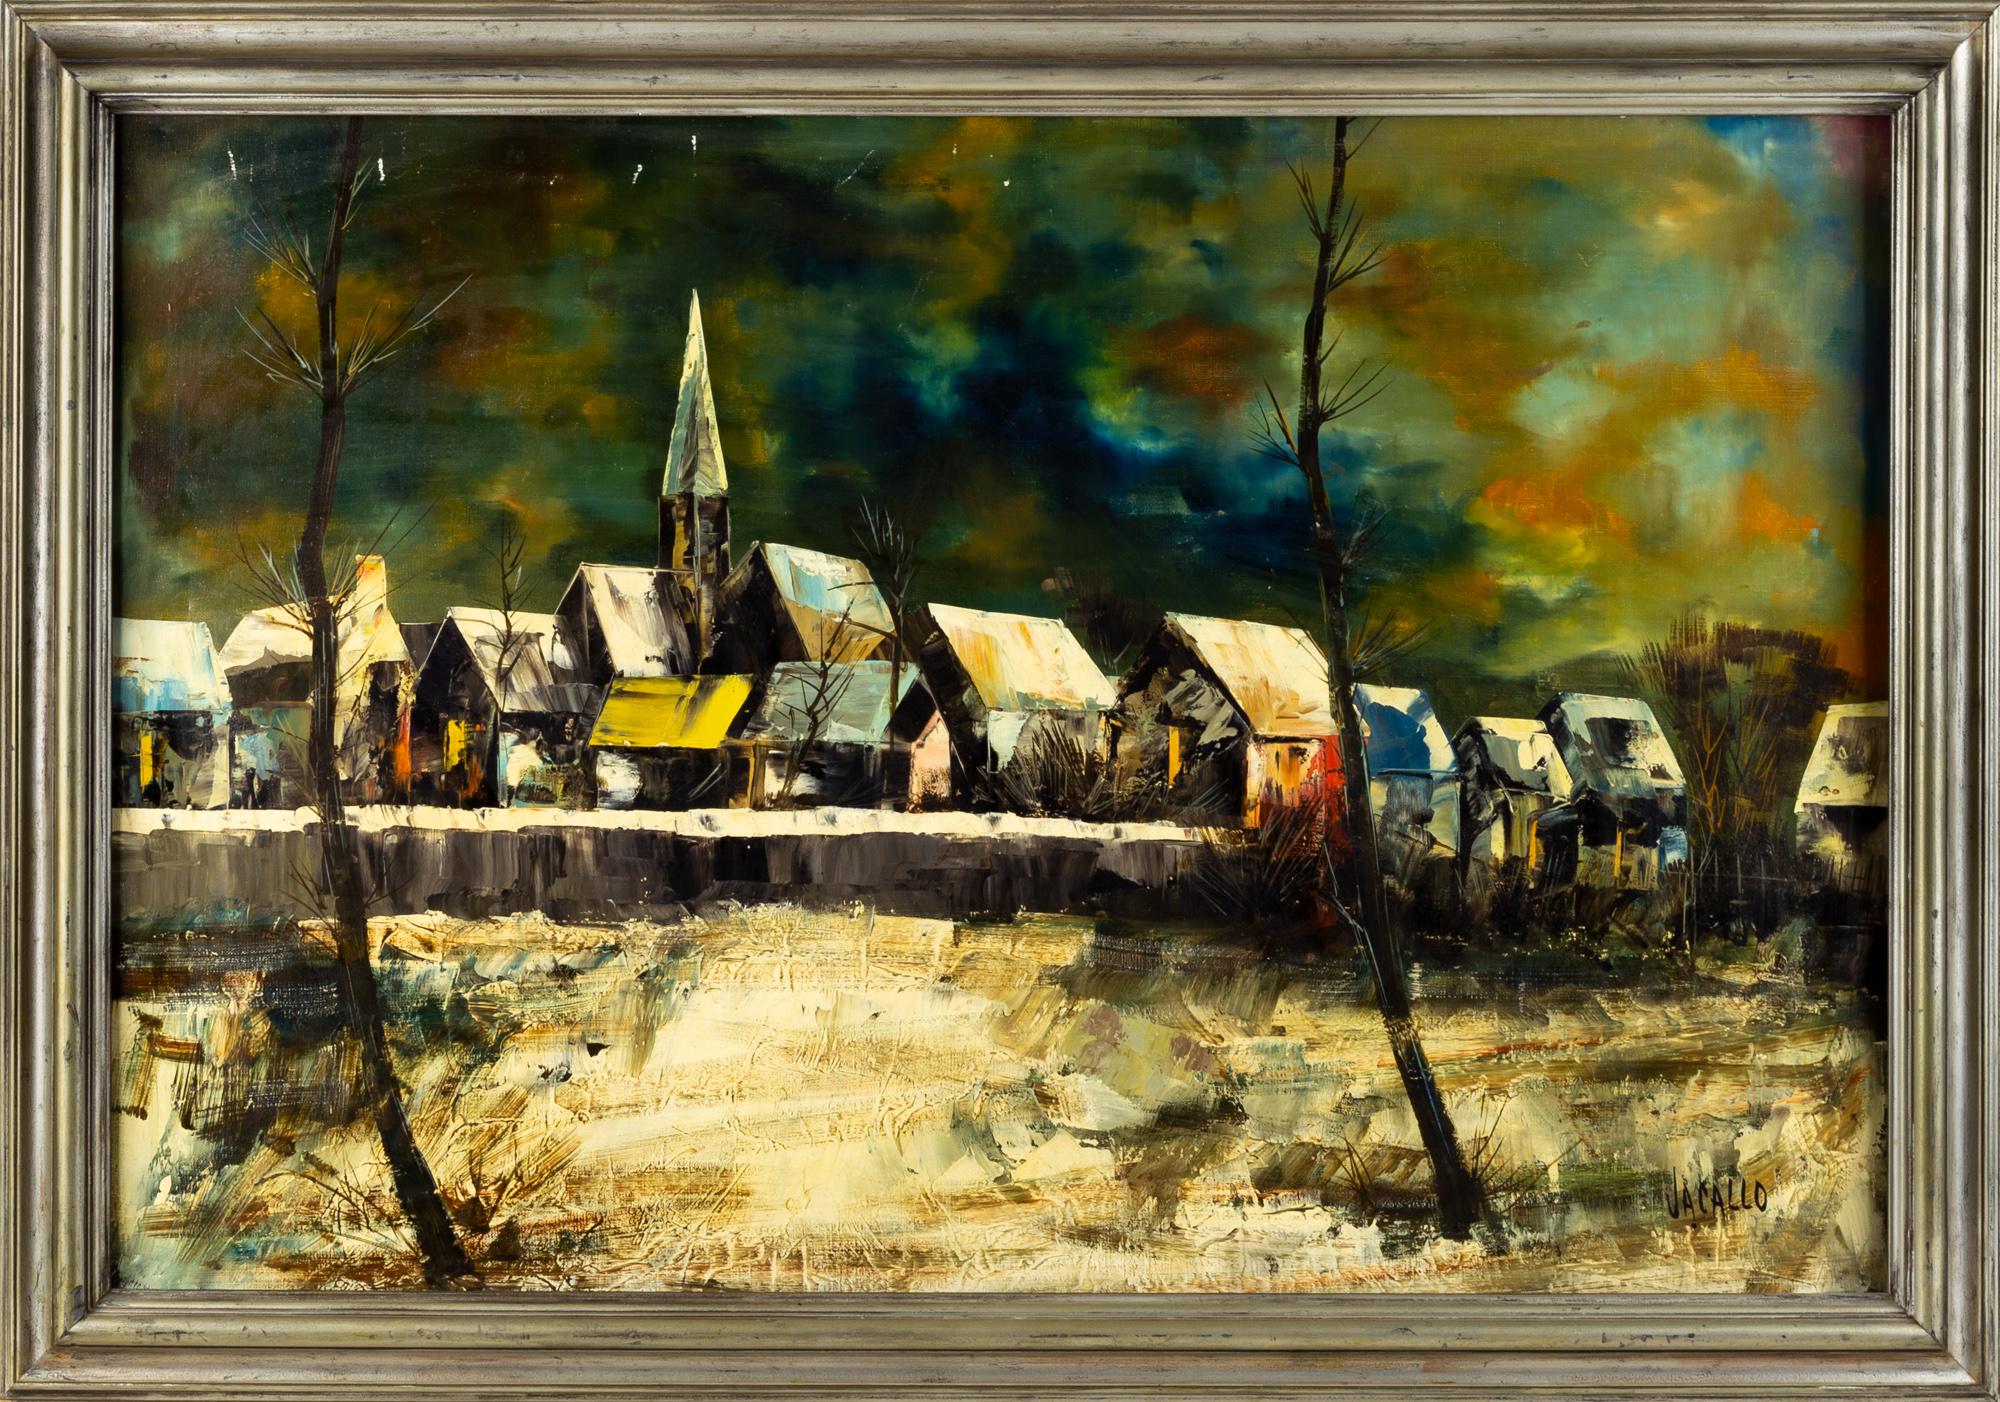 Mid century Jacallo 'Architectural Landscape' Signed oil on canvas painting

This piece measures: 40.25 wide x 1.75 deep x 28.5 inches high

This Painting is in Excellent Vintage Condition.

Each piece is carefully cleaned and packaged before